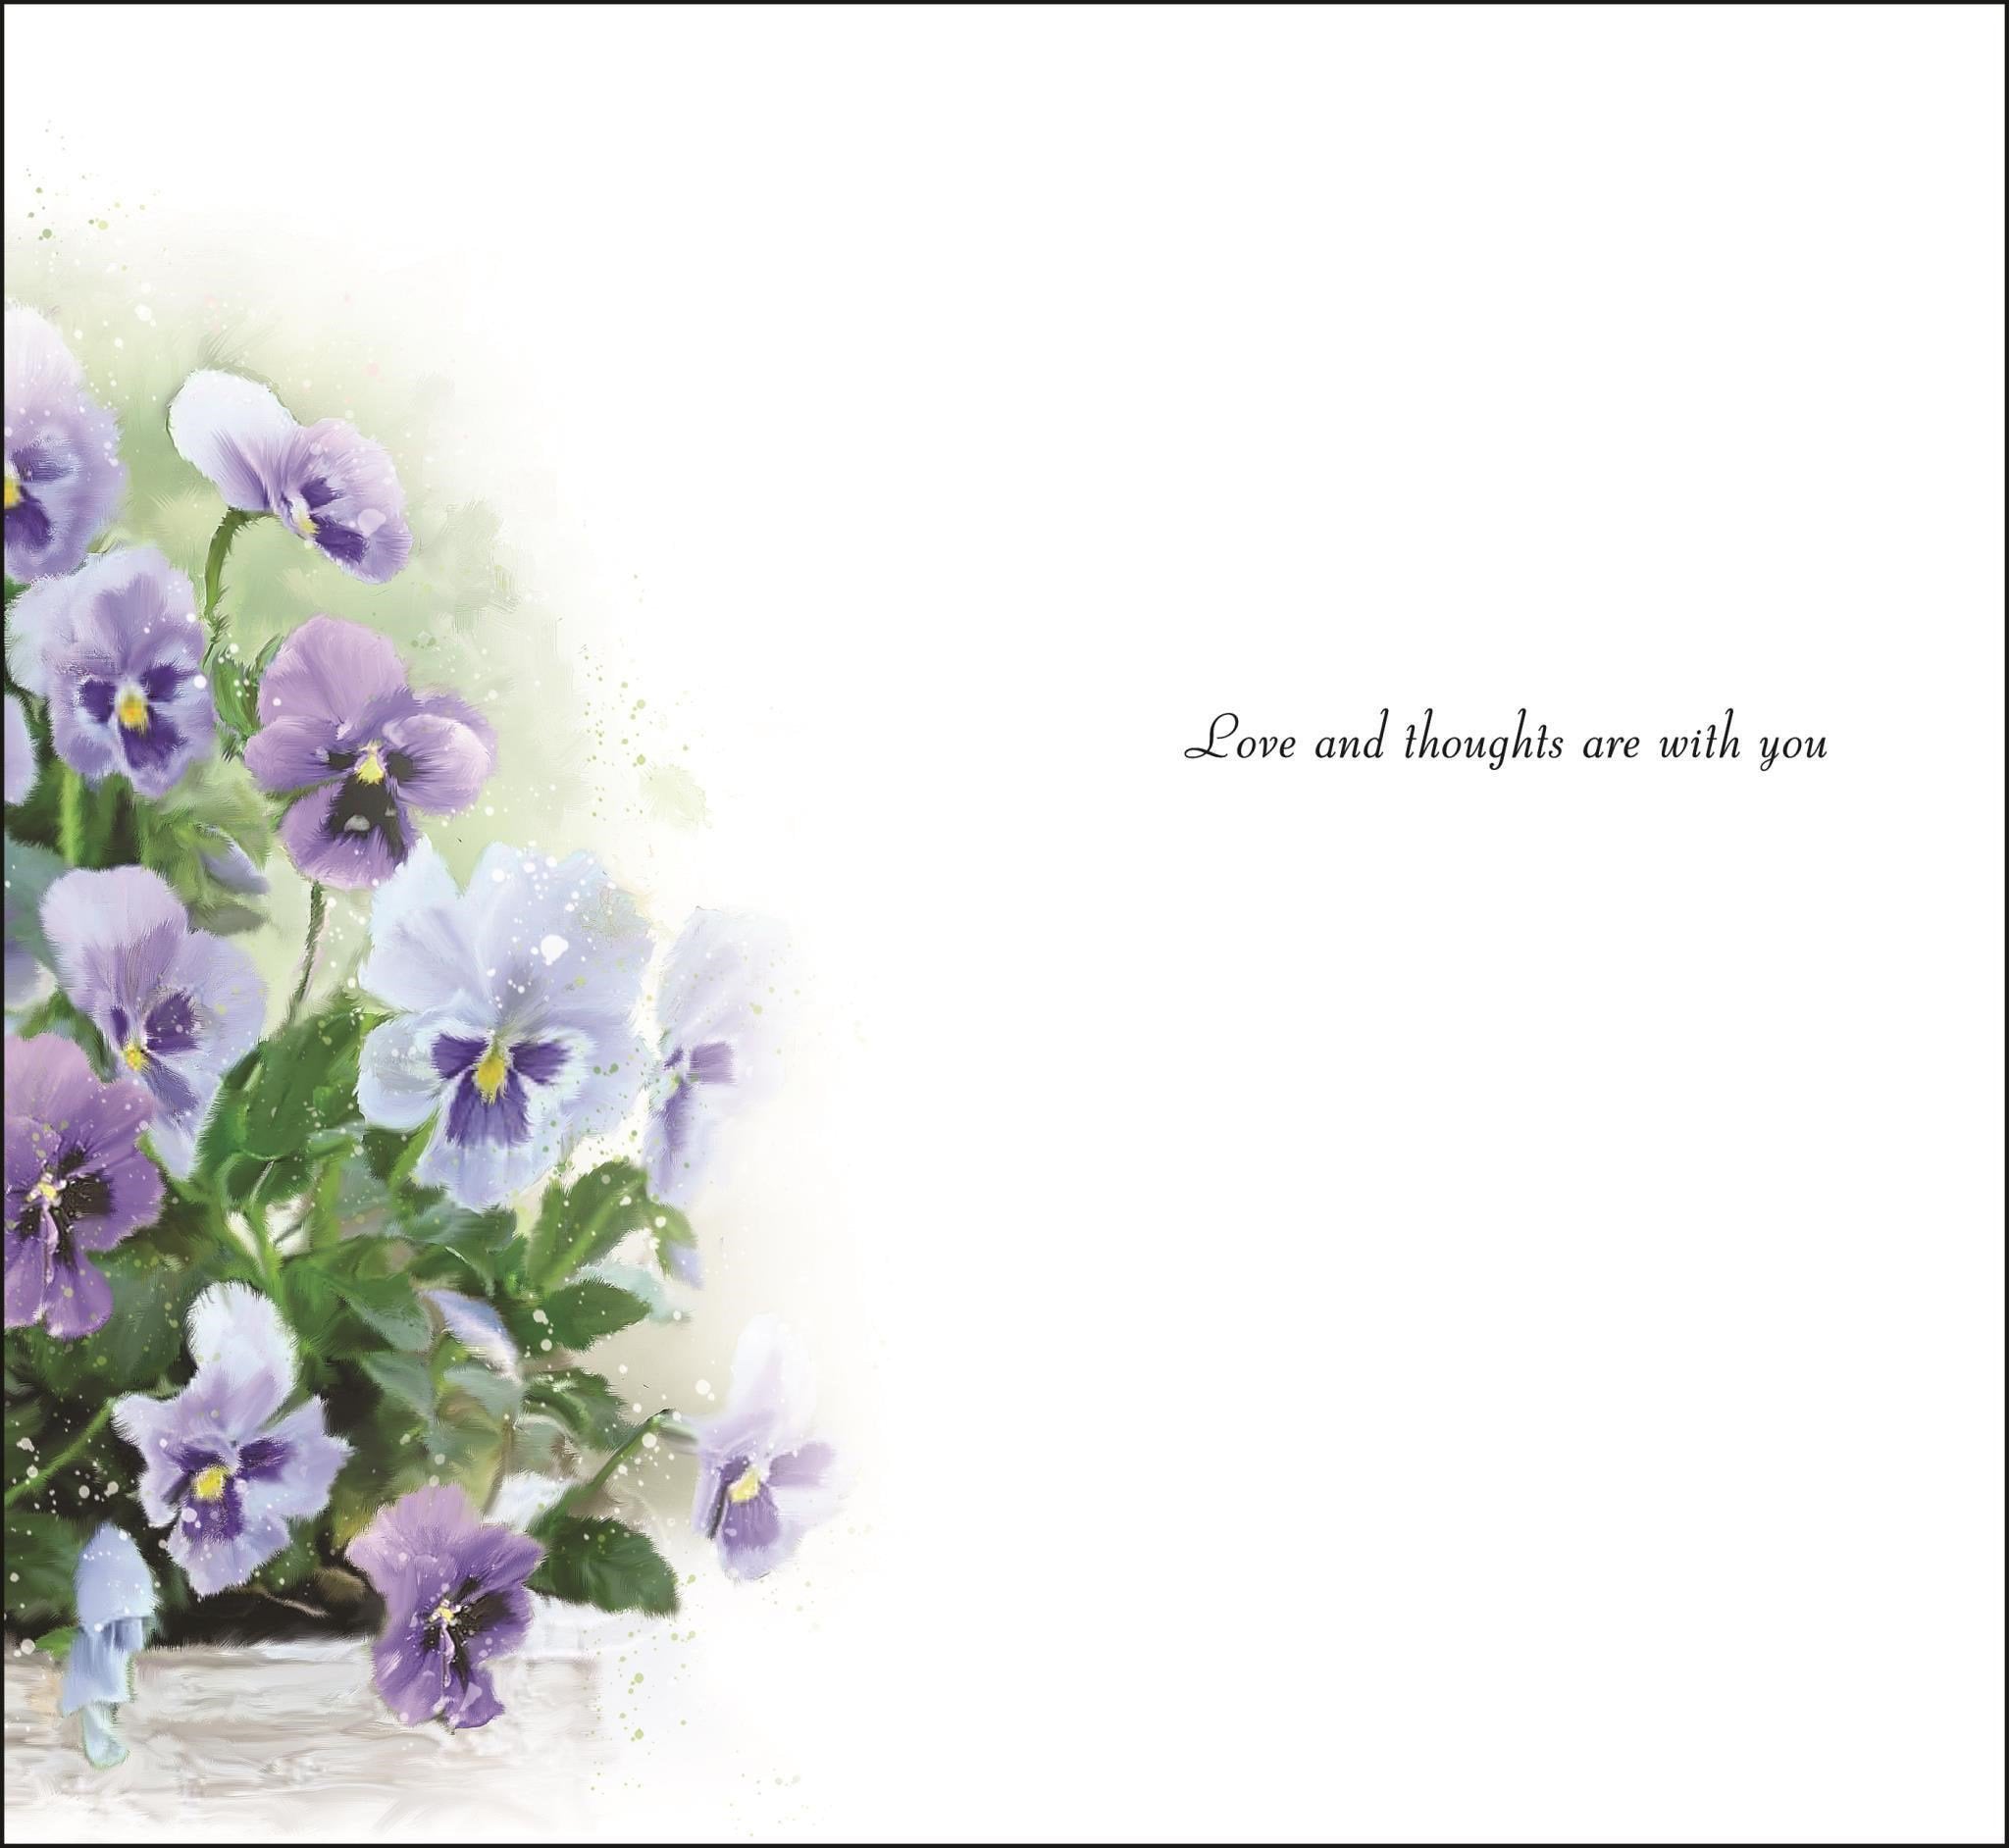 Inside of With Sincere Condolences Pansies Greetings Card